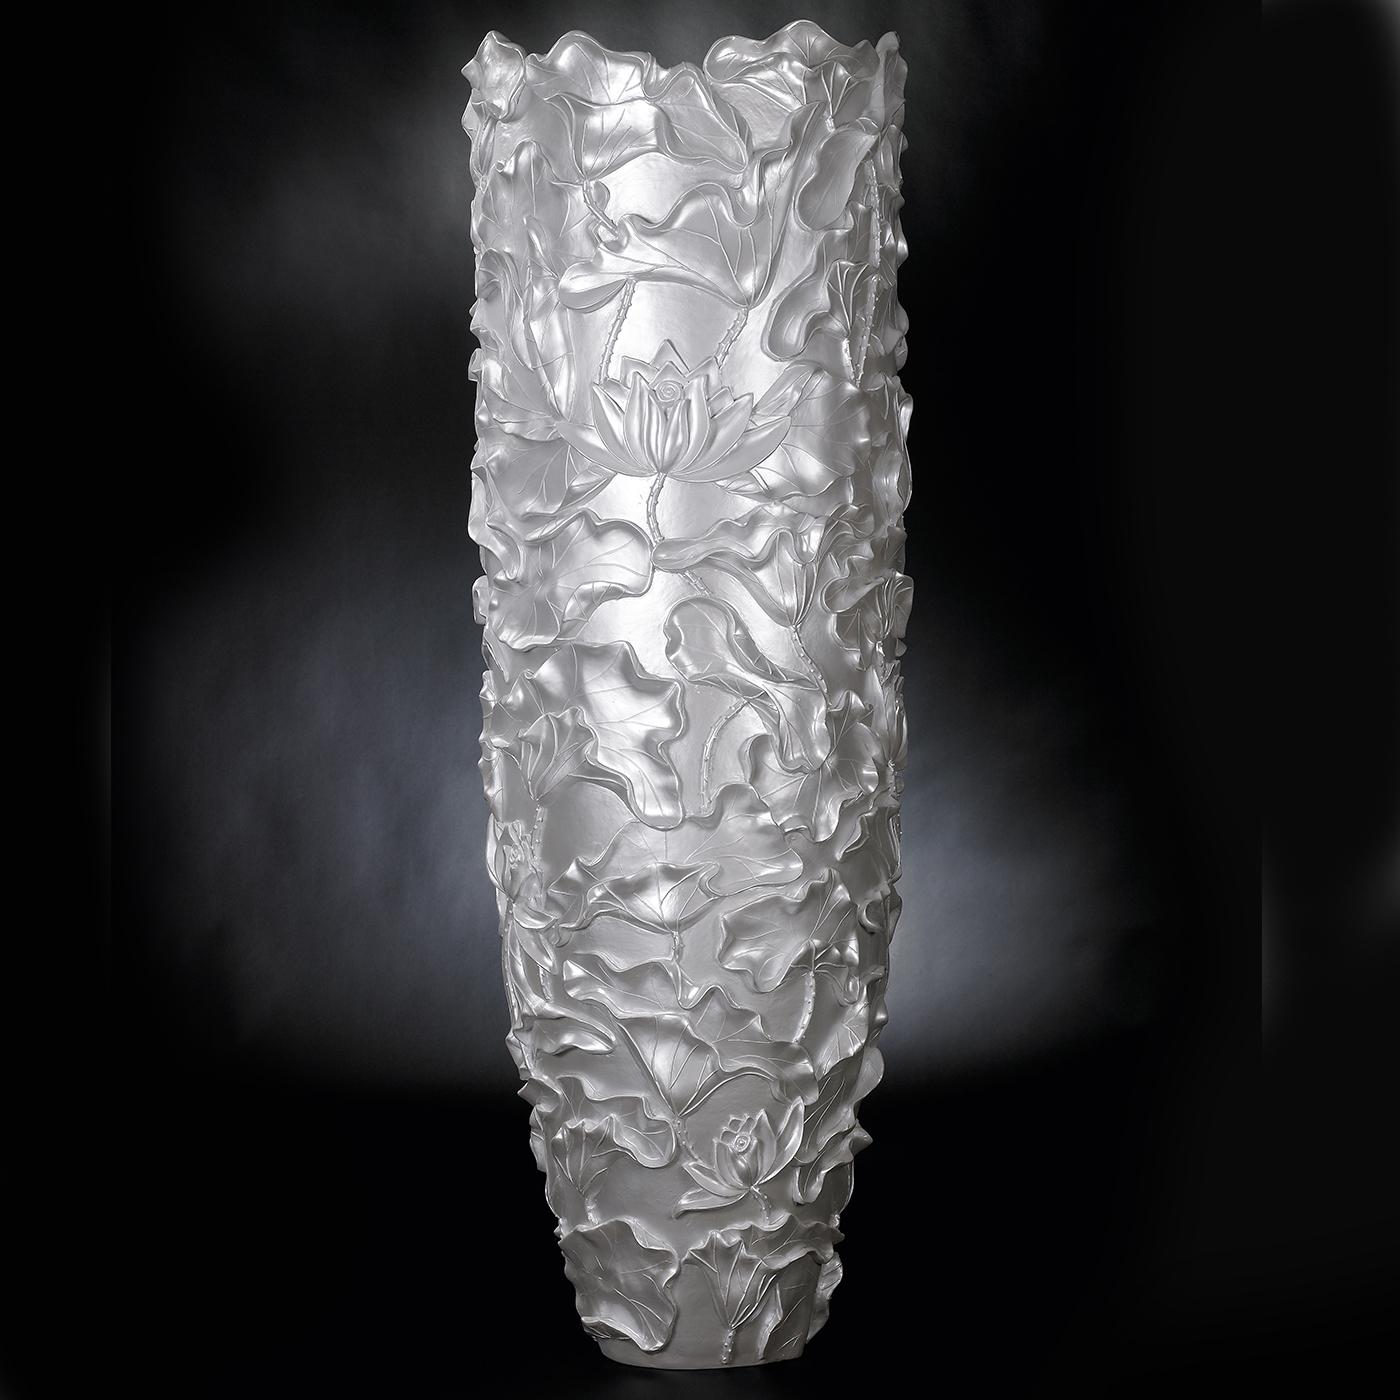 An exquisite combination of the Lotus and the Obice Collections, this vase flaunts the textural decoration of the first one and the tall and clean silhouette of the latter. Handcrafted of resin, it is marked by an iridescent mother of pearl hue that